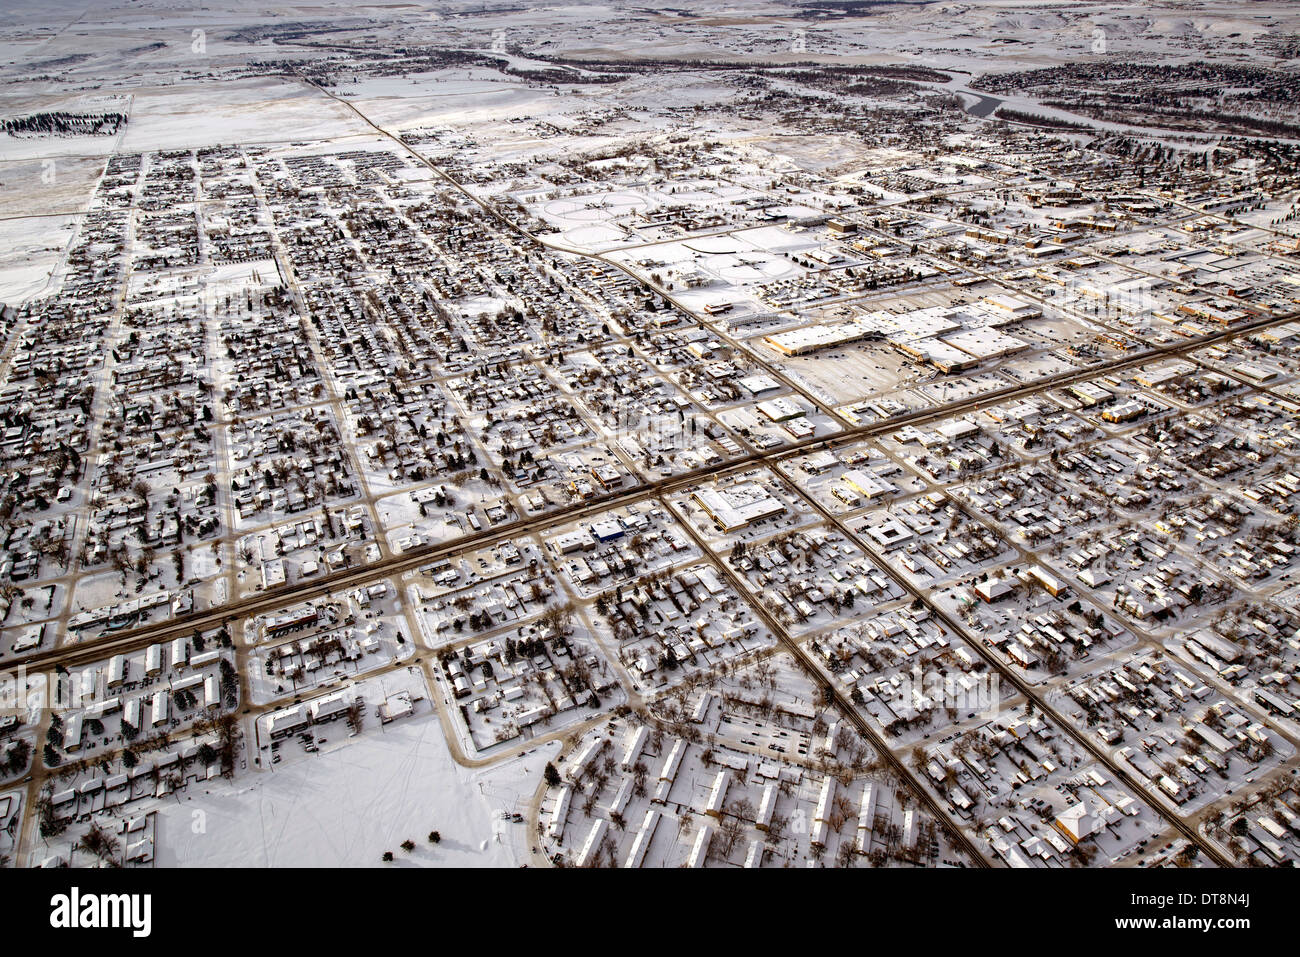 Aerial view of the frozen plains of Montana as an unusually bitter winter grips the midwest February 7, 2014 in Great Falls, Montana. Stock Photo